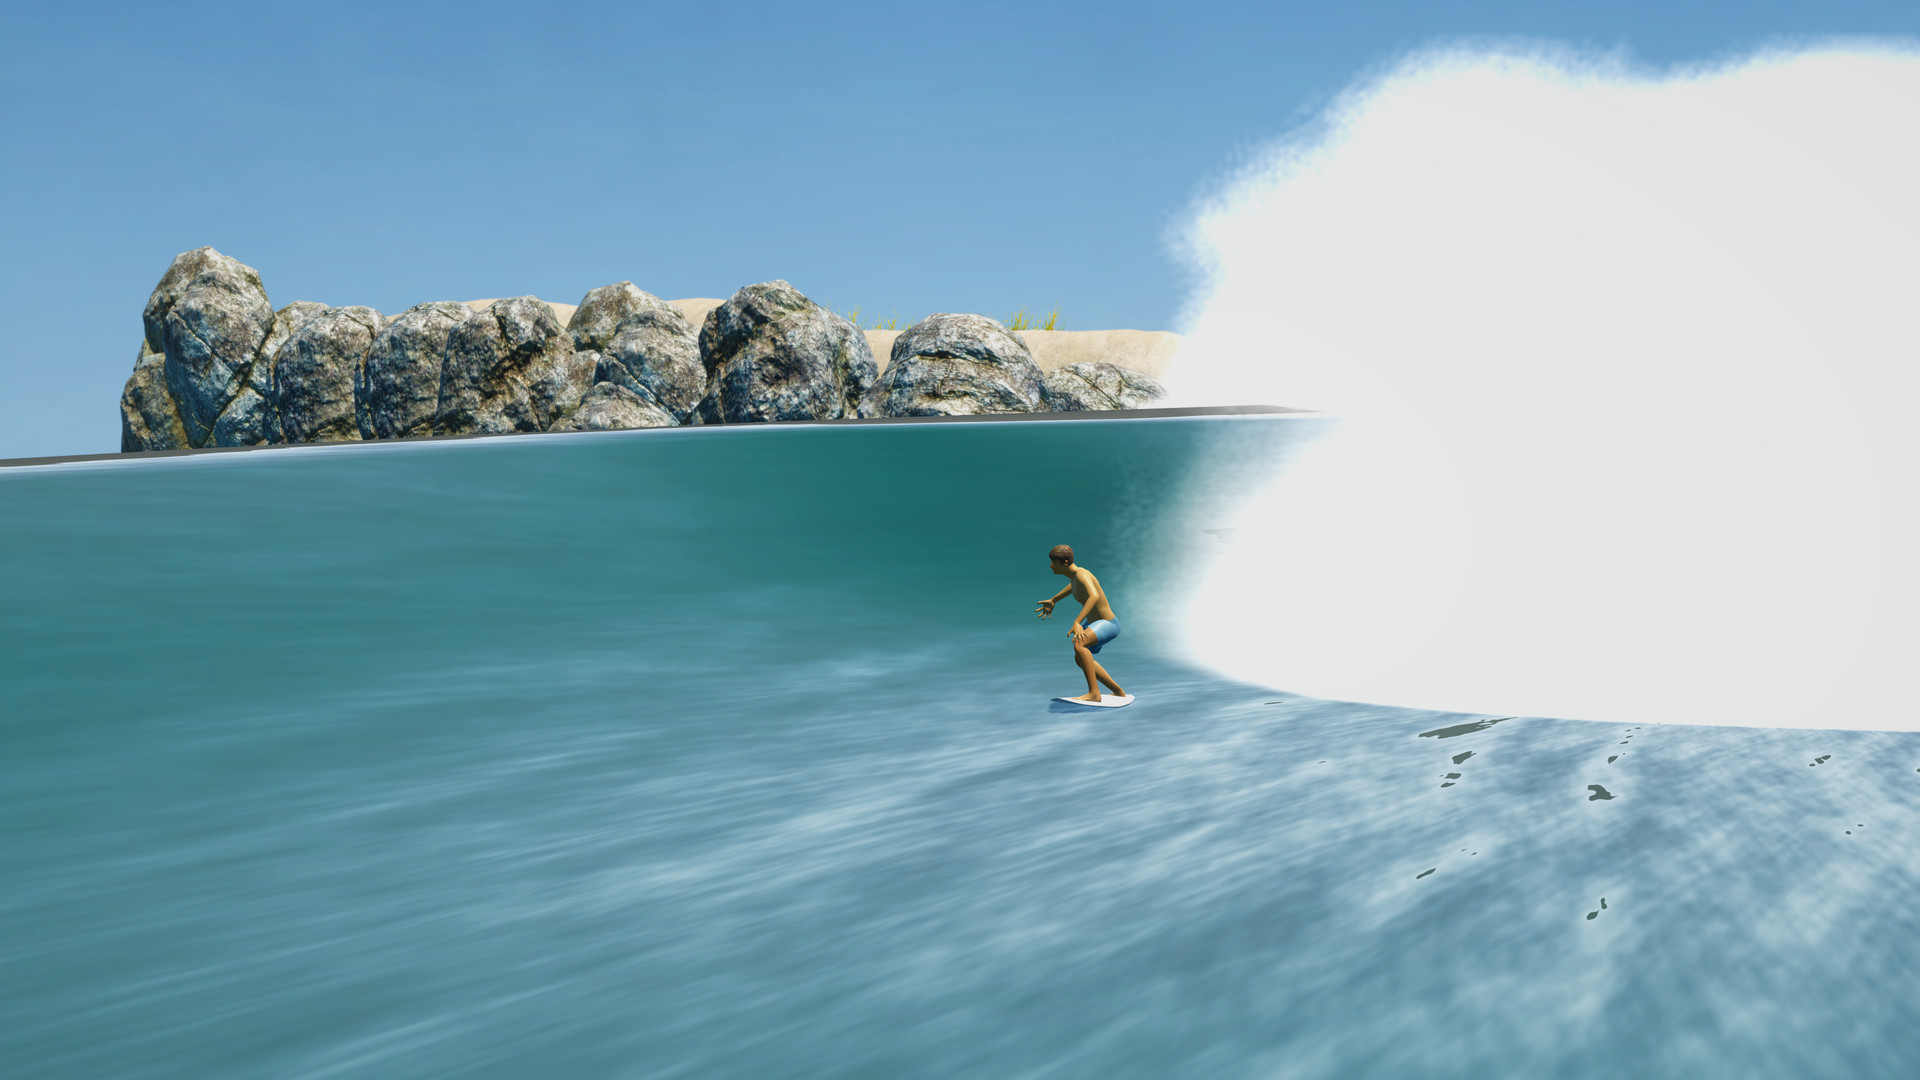 Search for Surf Free Download